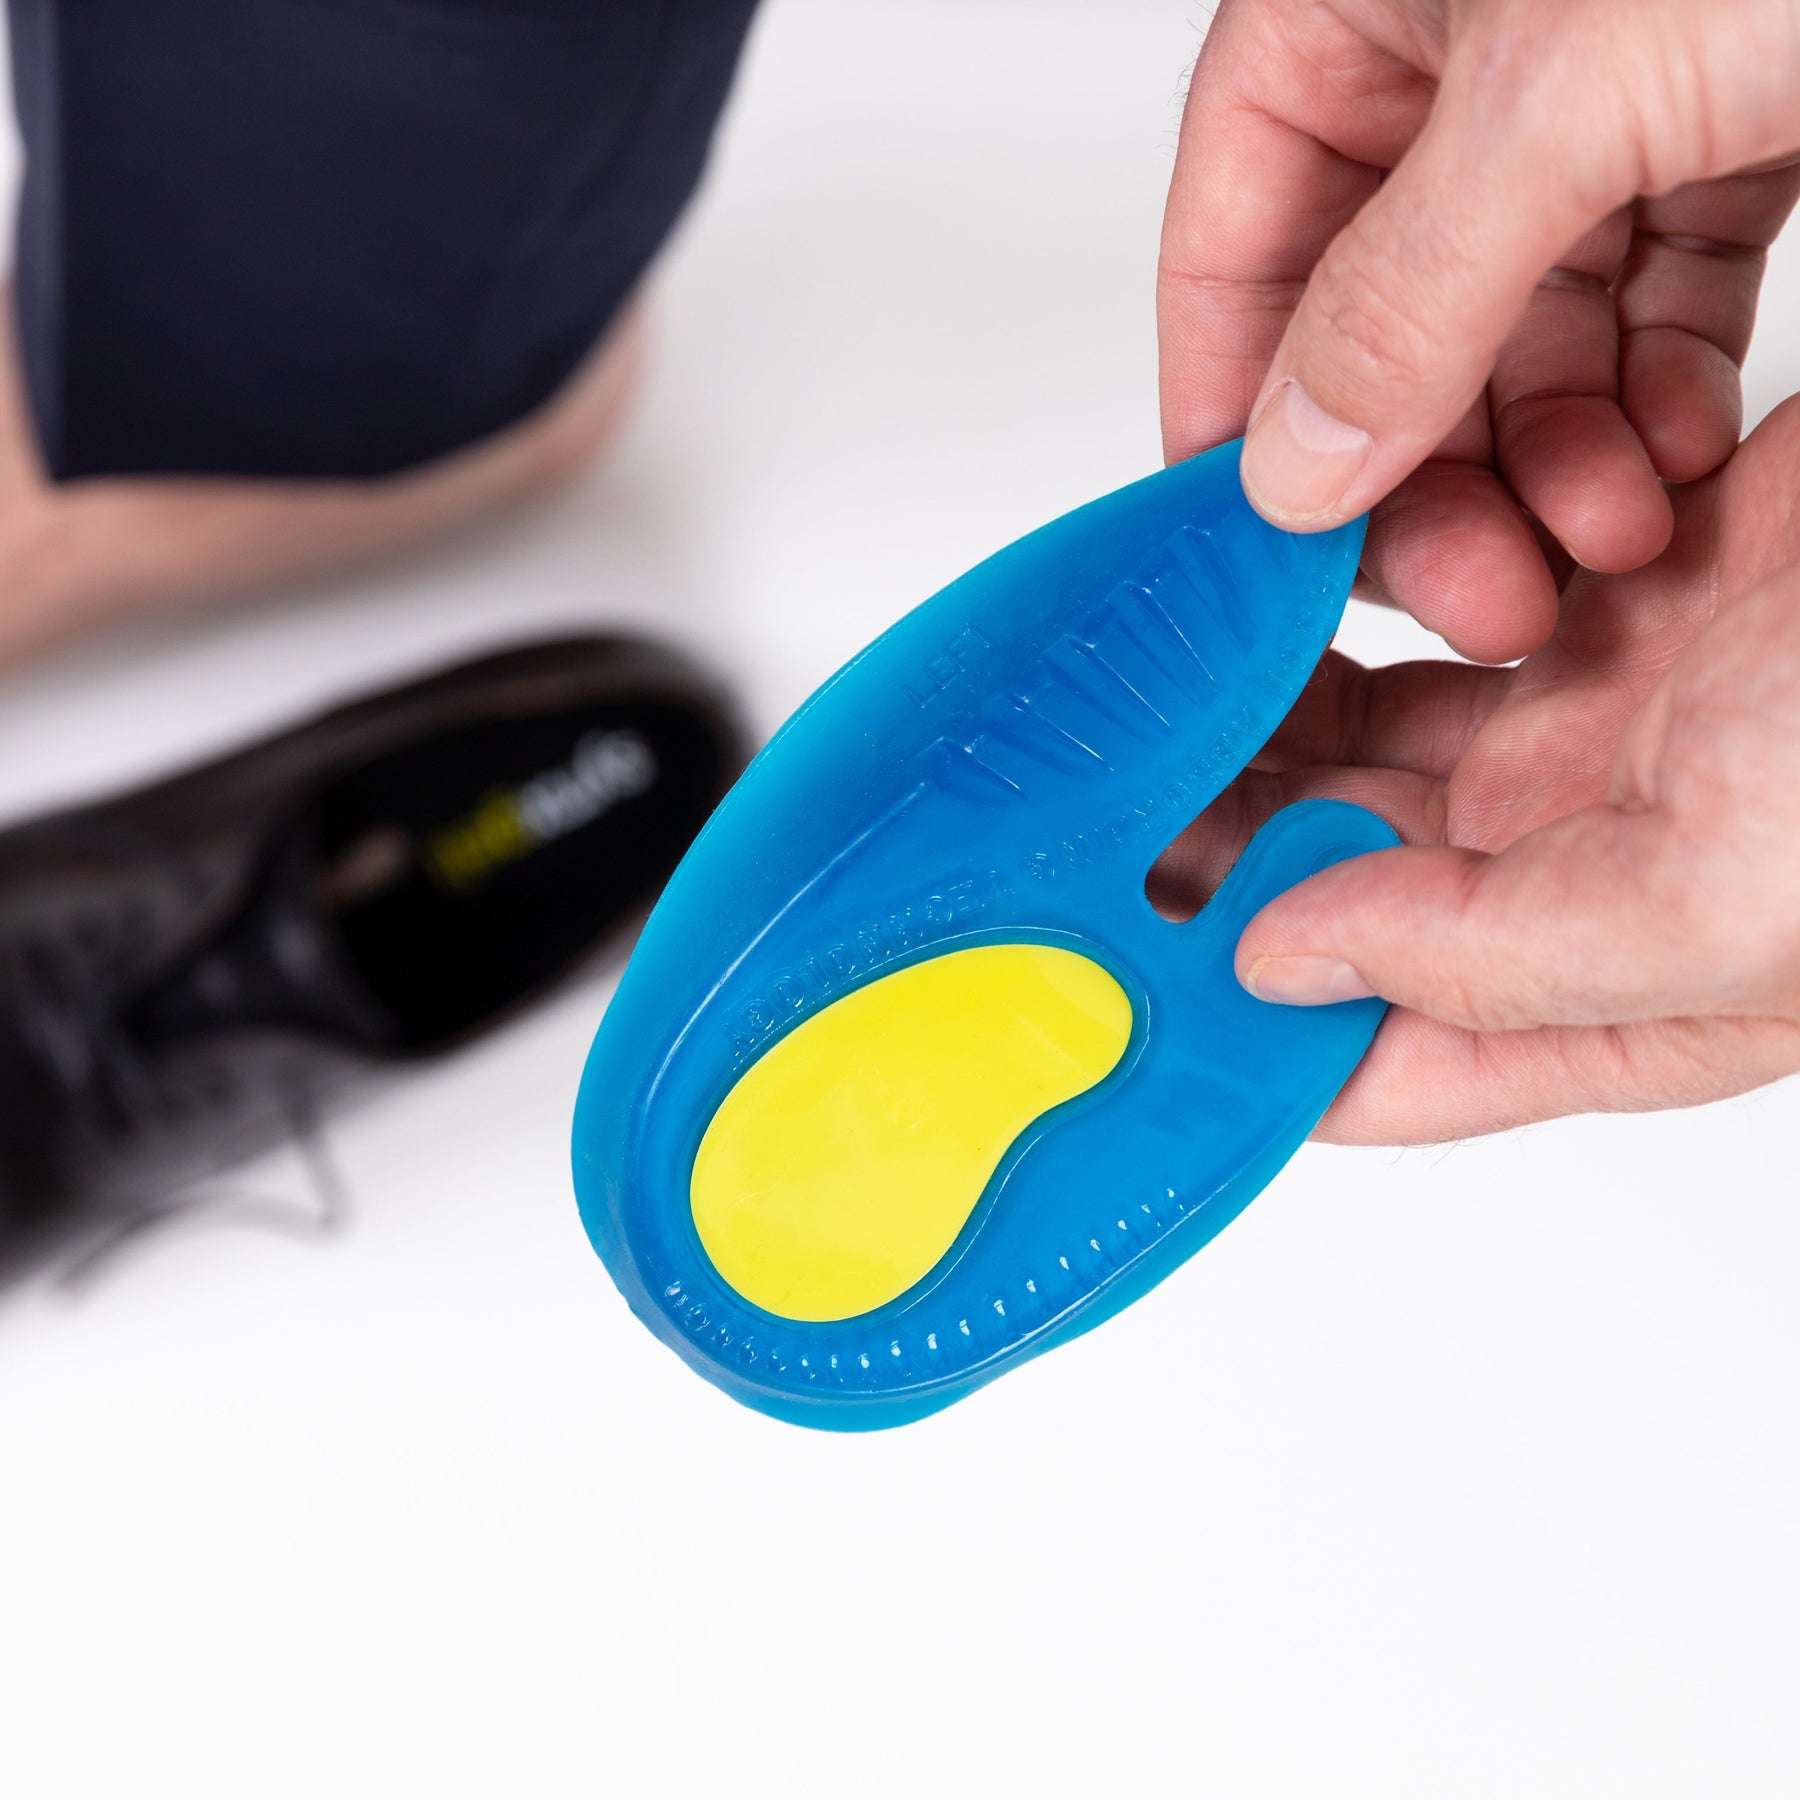 man holding up a synxgeli heel cushion designed to cushion, protect and relieve the heel and Achilles